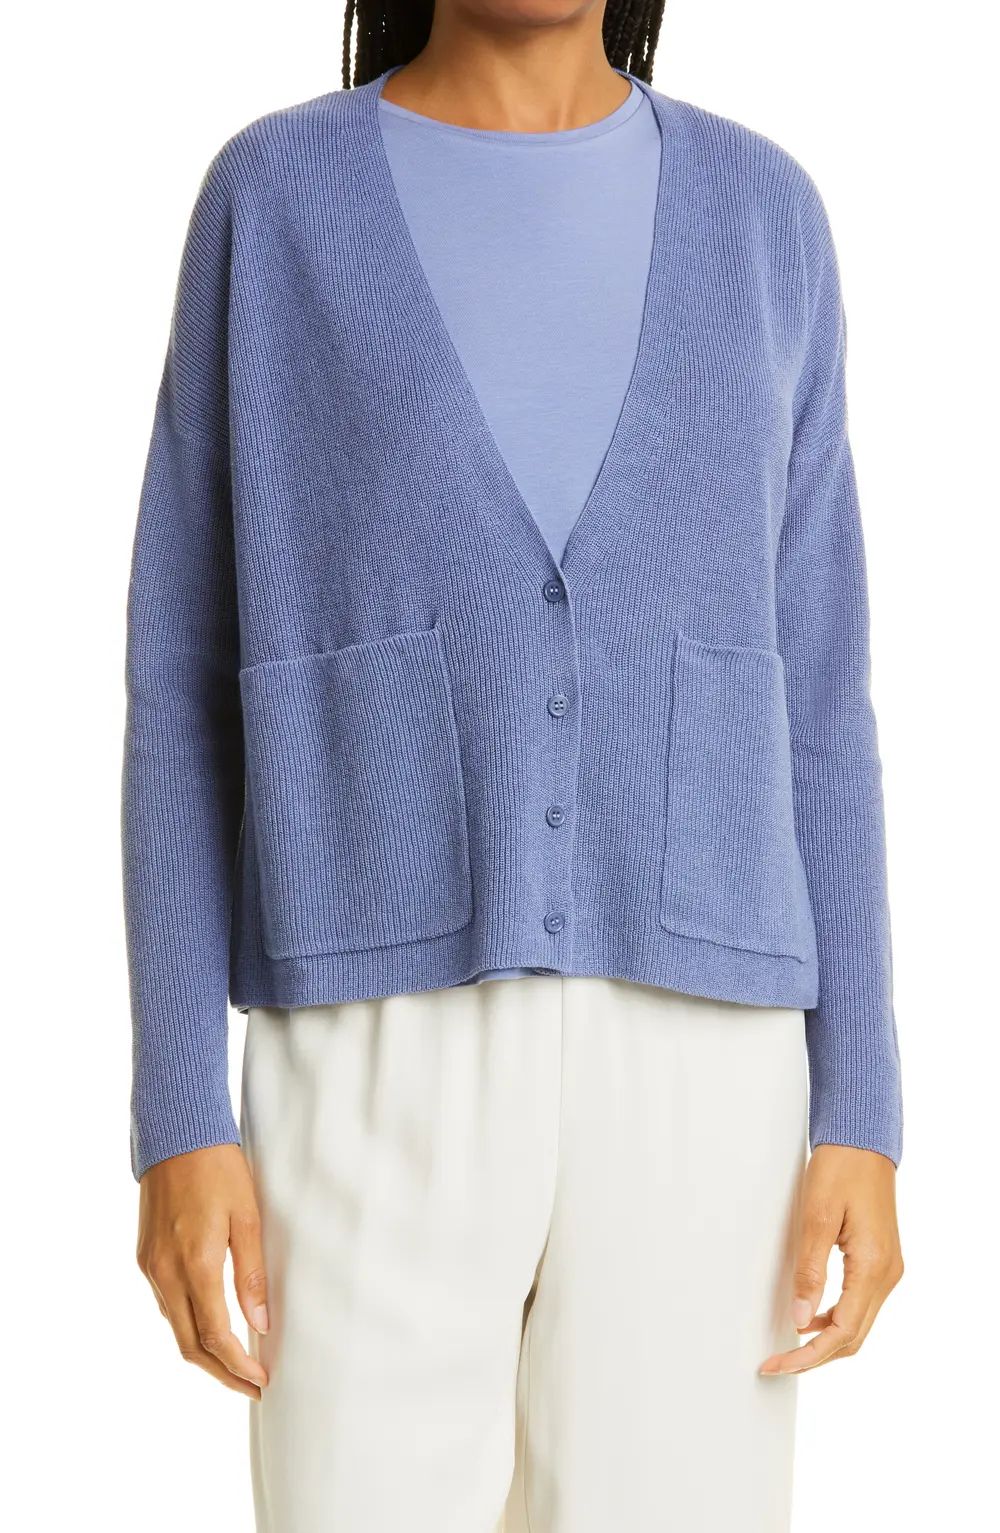 Eileen Fisher V-Neck Organic Linen & Cotton Cardigan, Size Medium in Periwinkle at Nordstrom | Nordstrom Canada